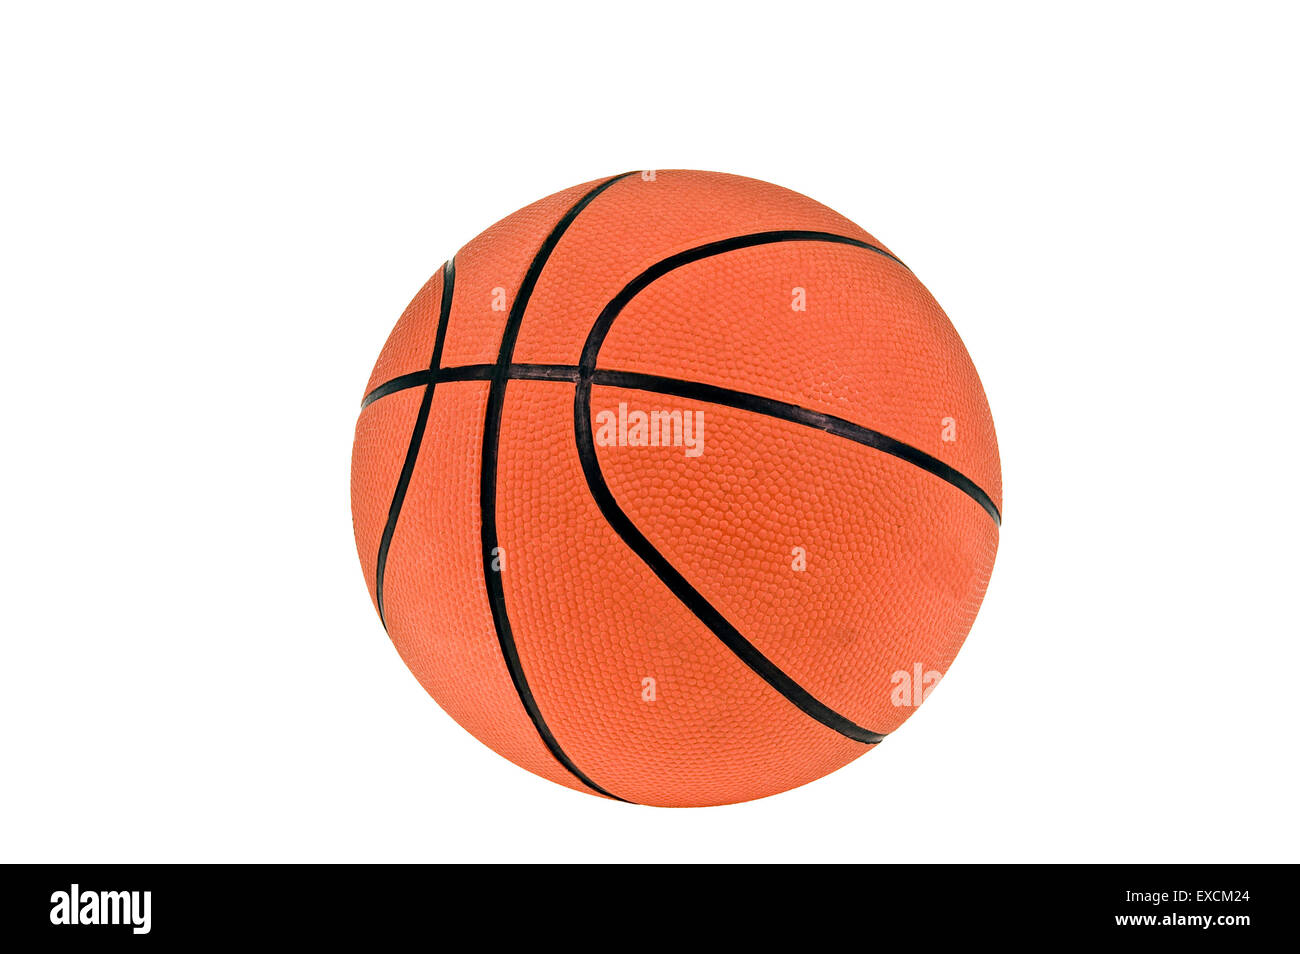 American Basketball Isolated On White Stock Photo